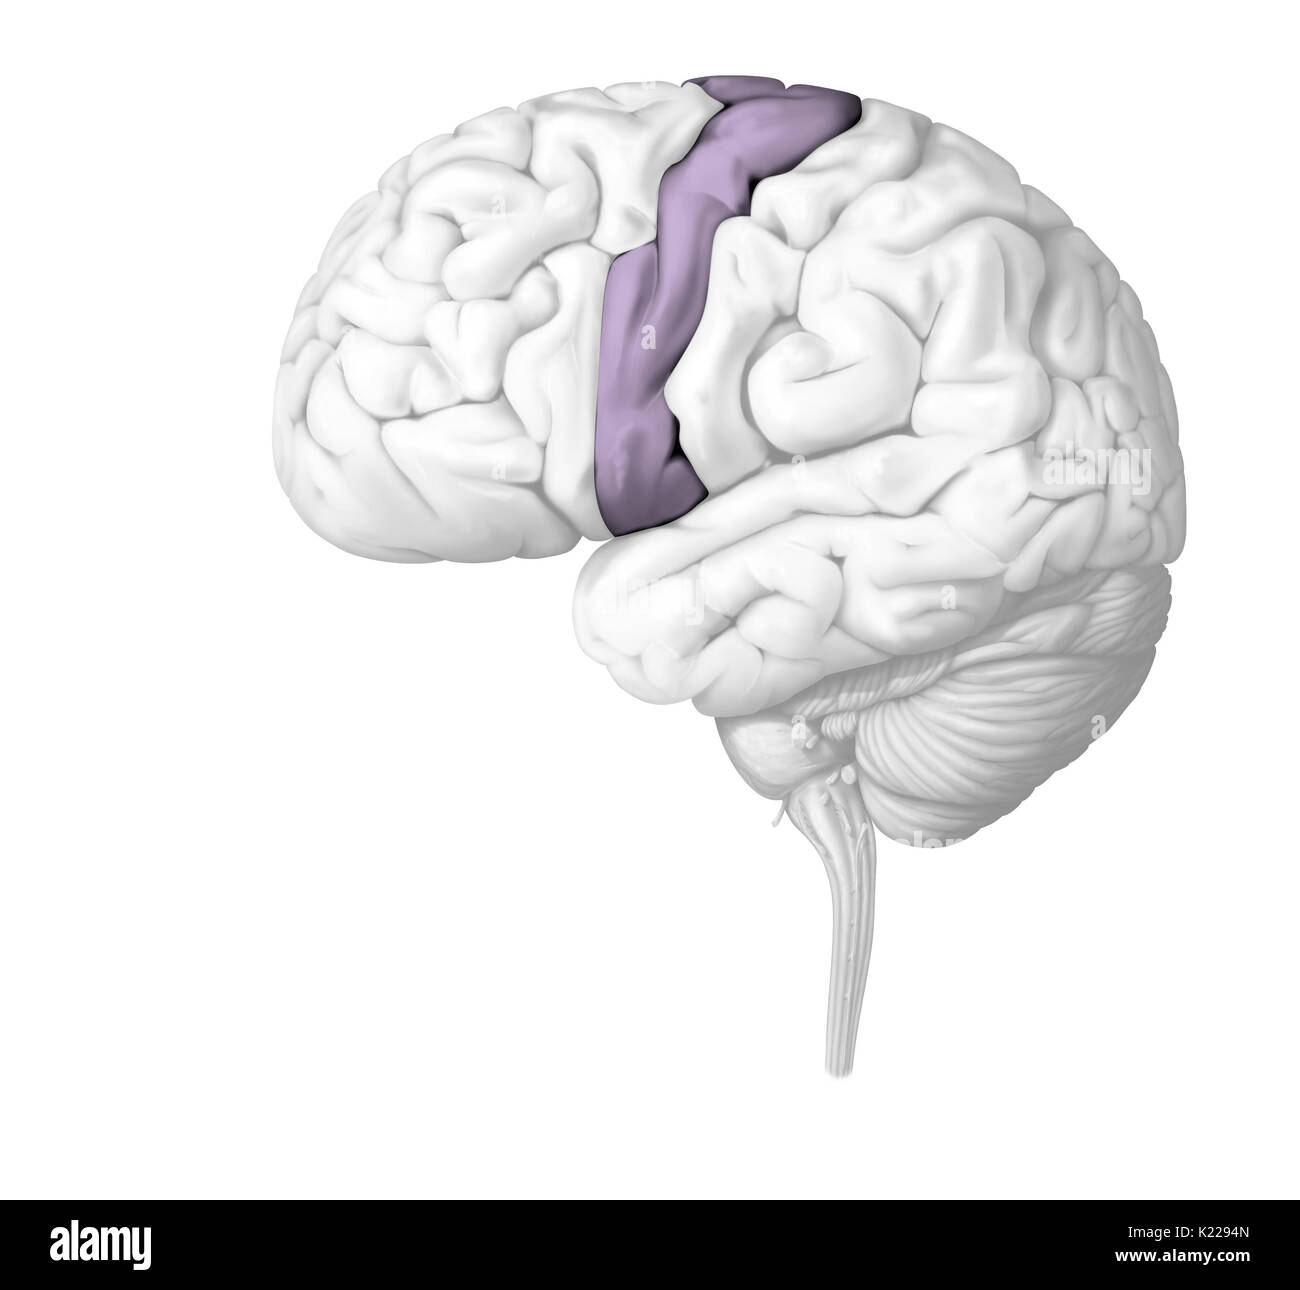 A voluntary movement is an intentionally executed movement caused by the motor commands emitted by the motor cortex. These commands are transmitted to the skeletal muscles through the spinal cord and spinal nerves. The muscle contraction that results produces the desired movement. The cerebellum controls the precision and coordination of voluntary movements. Stock Photo